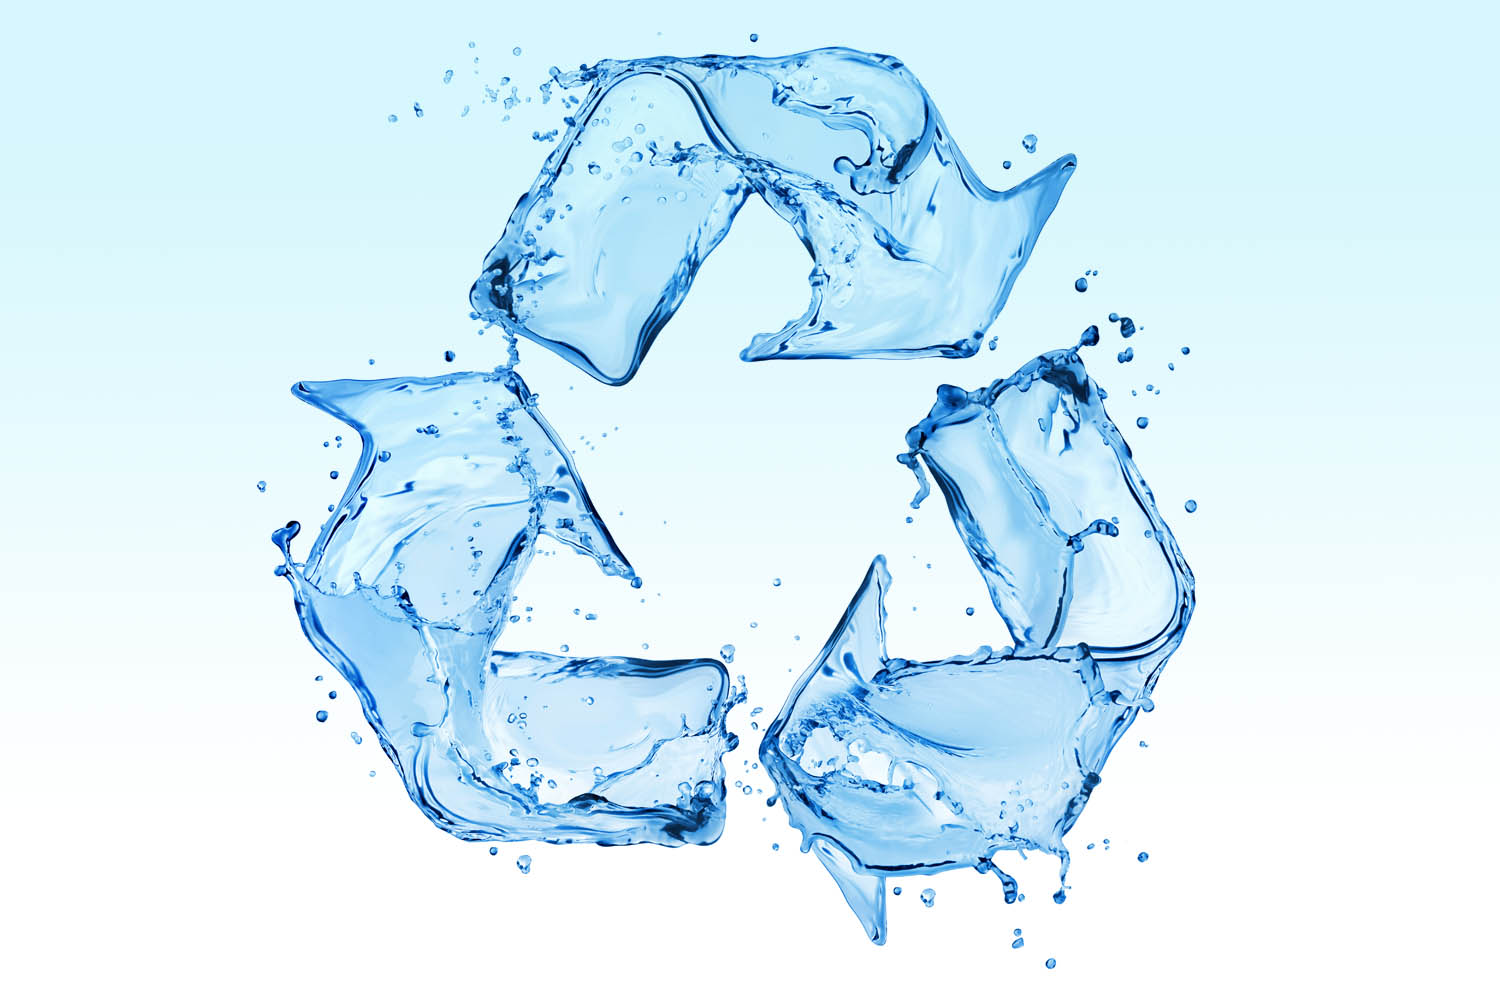 Watery recycling symbol